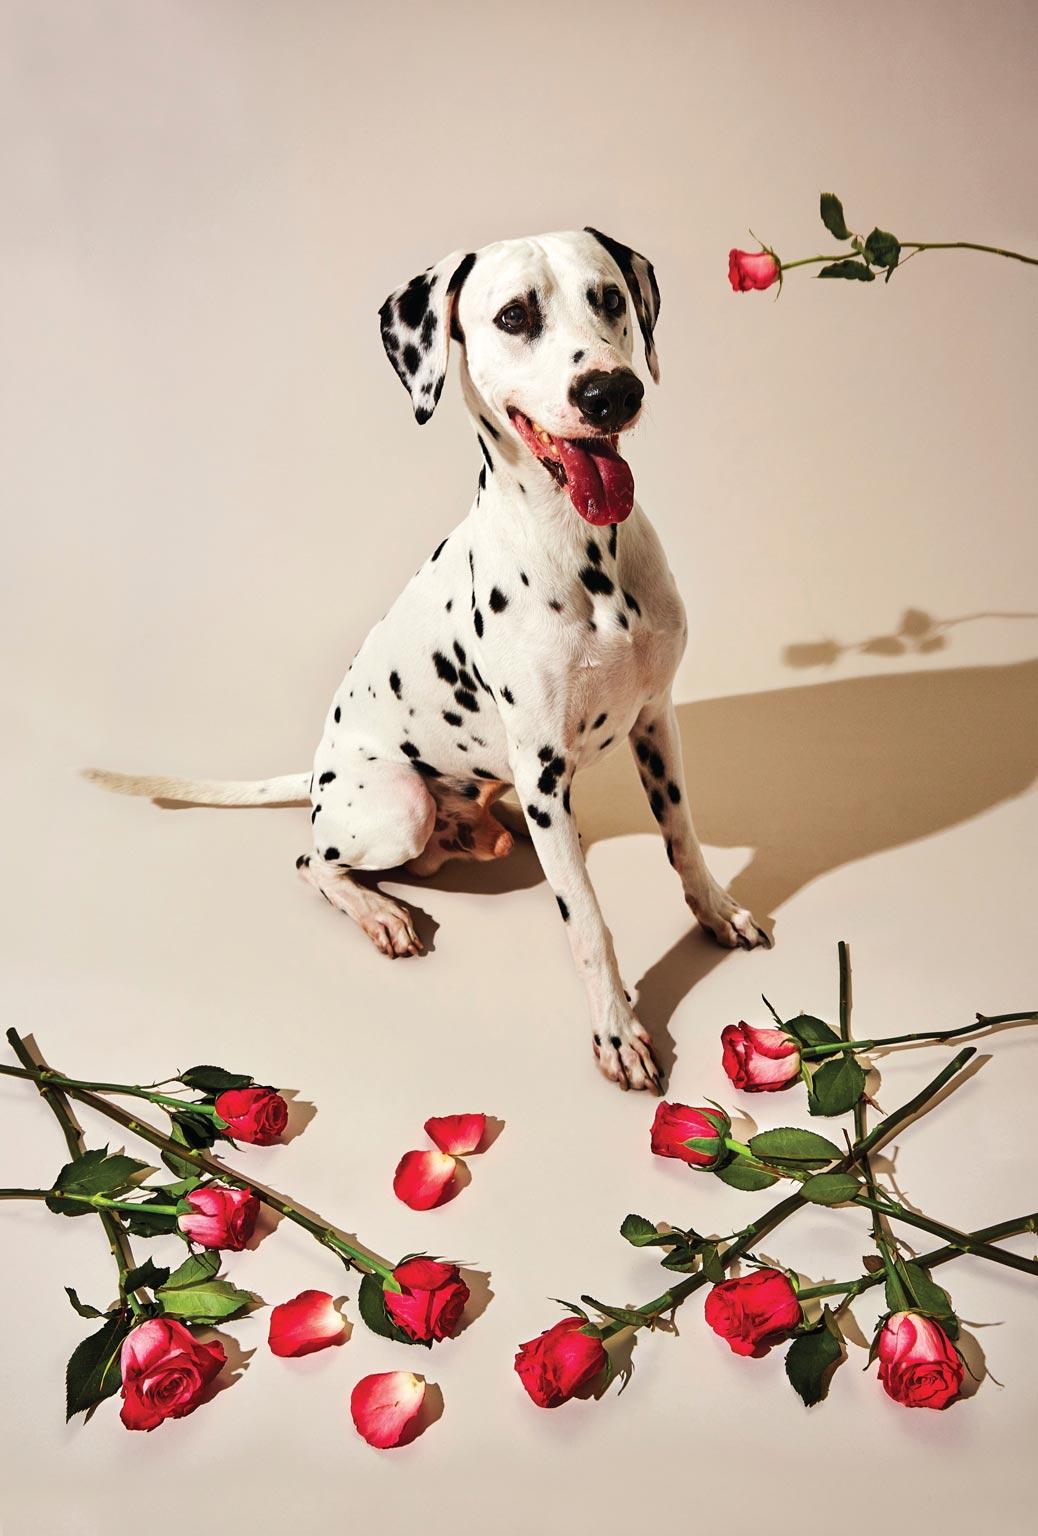 Gillie and Marc Schattner Animal Print - Animal Photography Print - Pop Art - Gillie and Marc - Dalmatian with roses